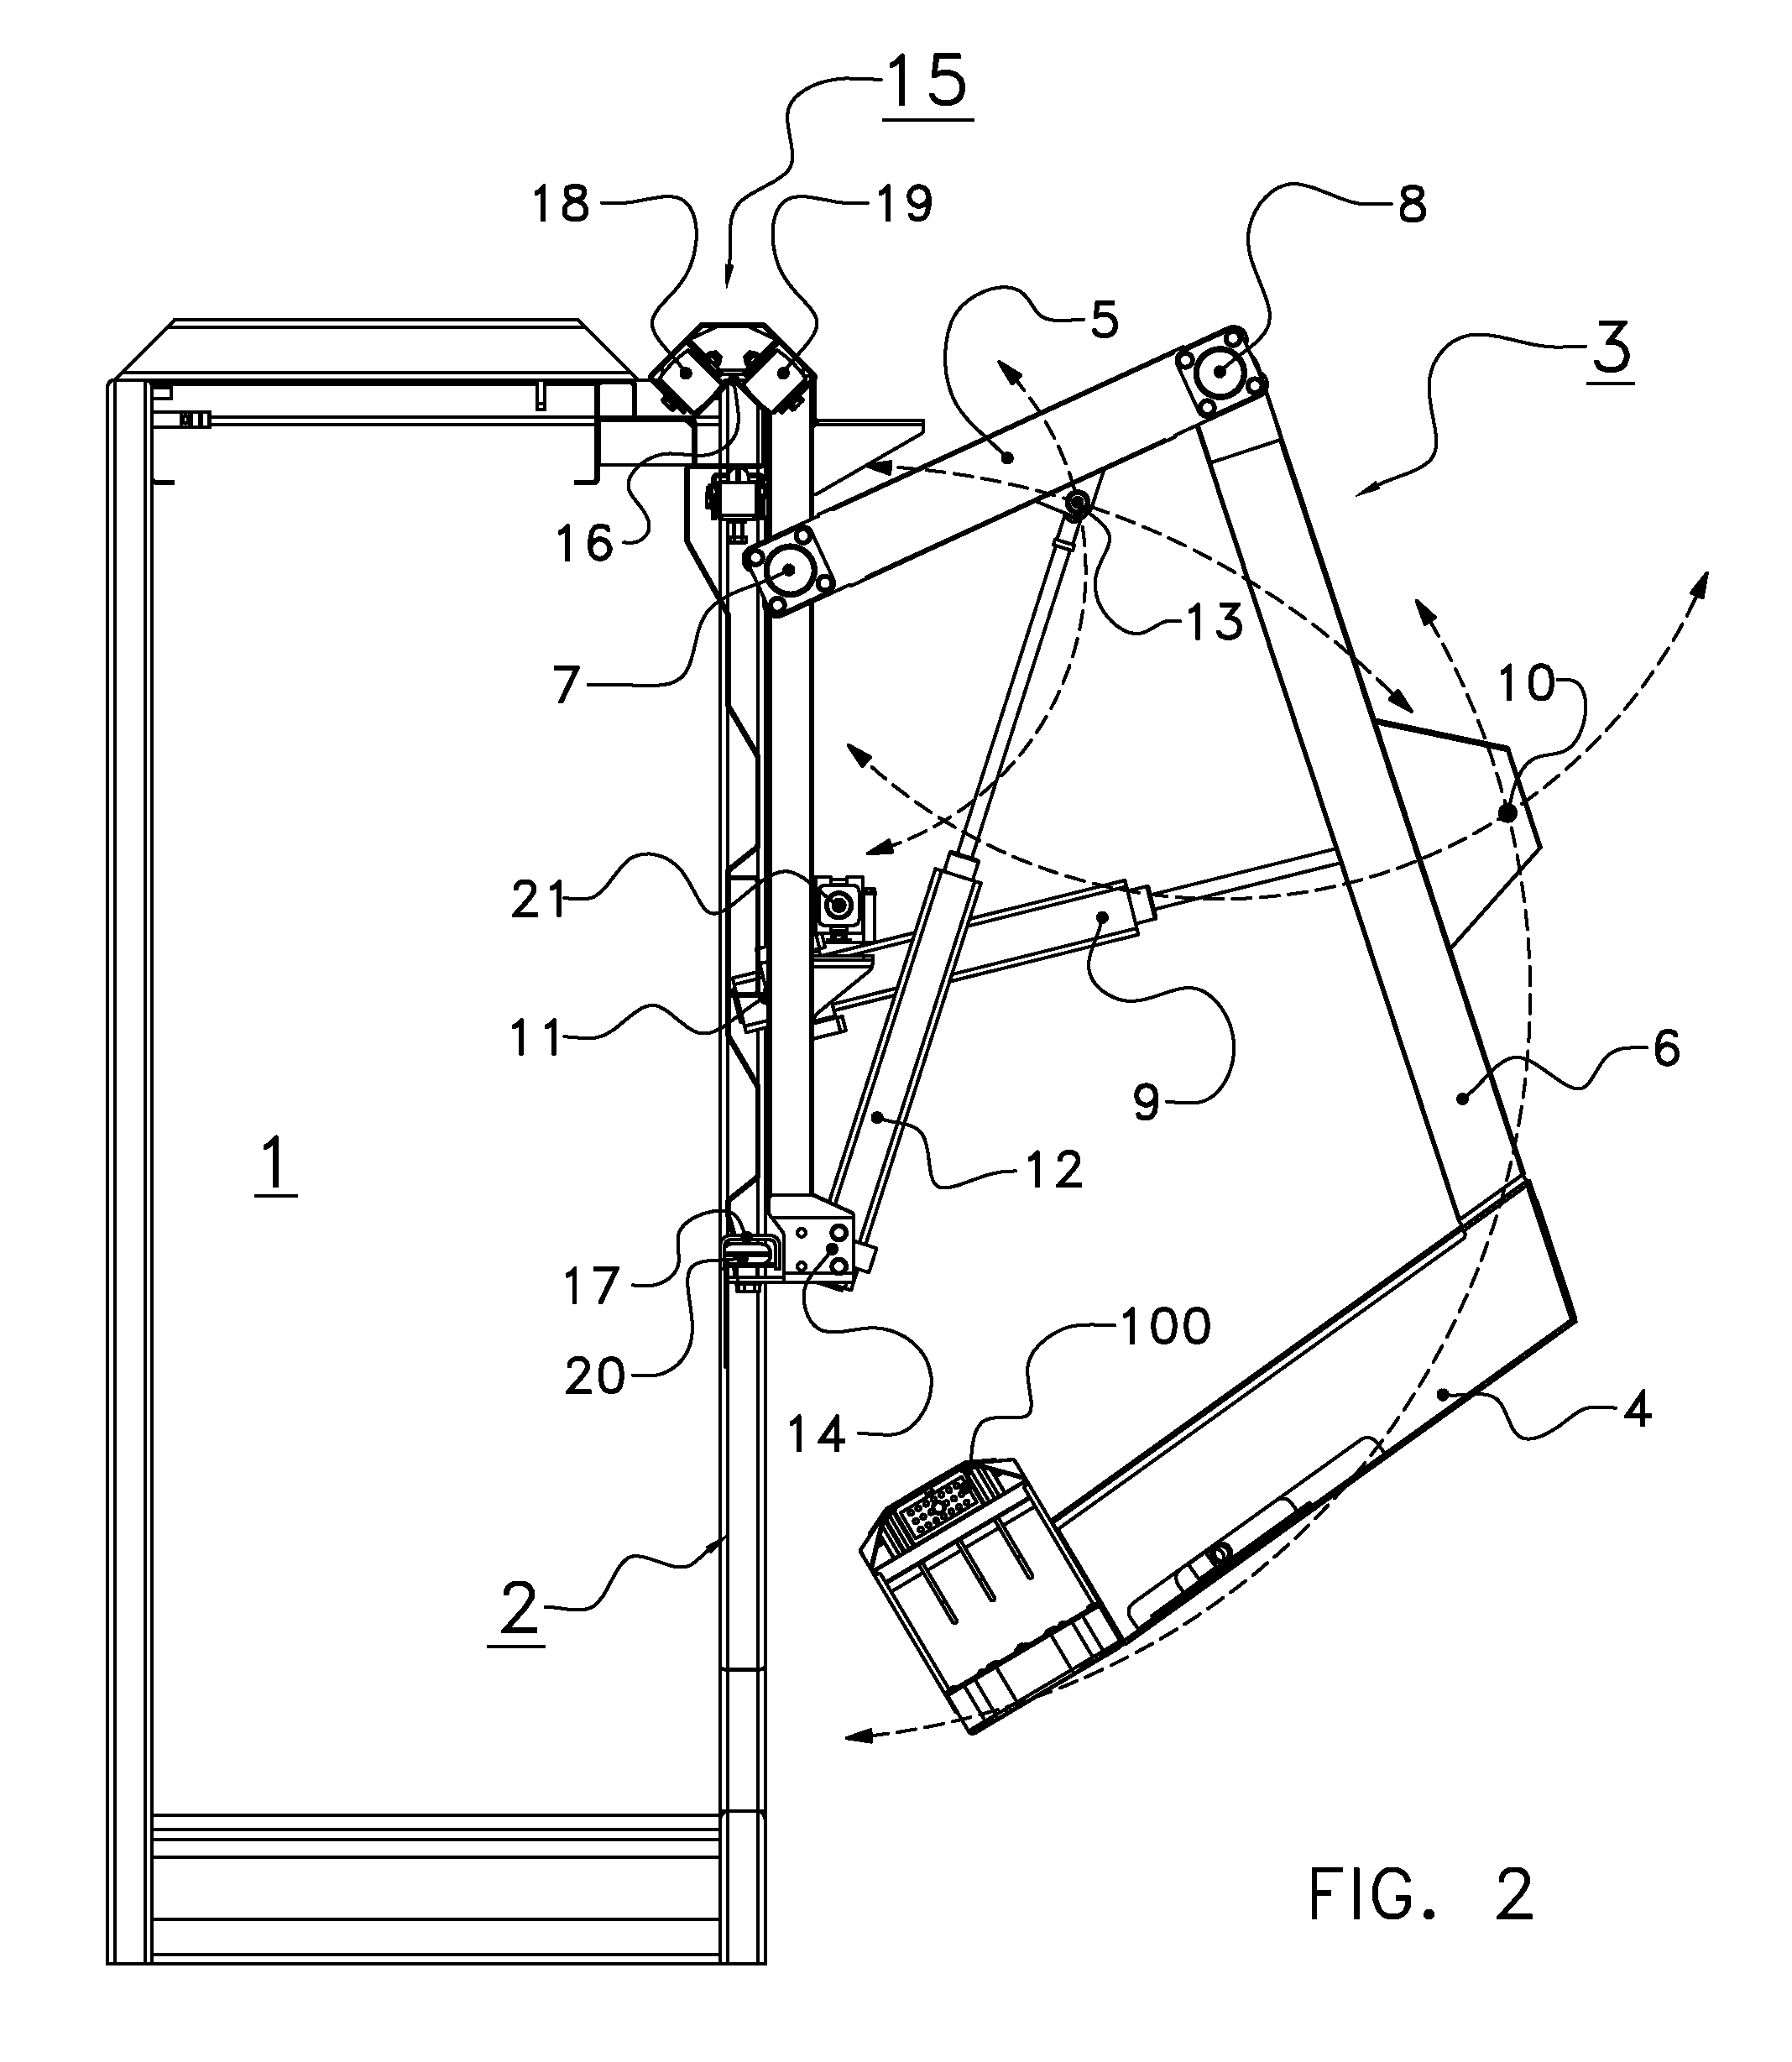 Method of controlling a milking implement, a software program for and an implement performing the method